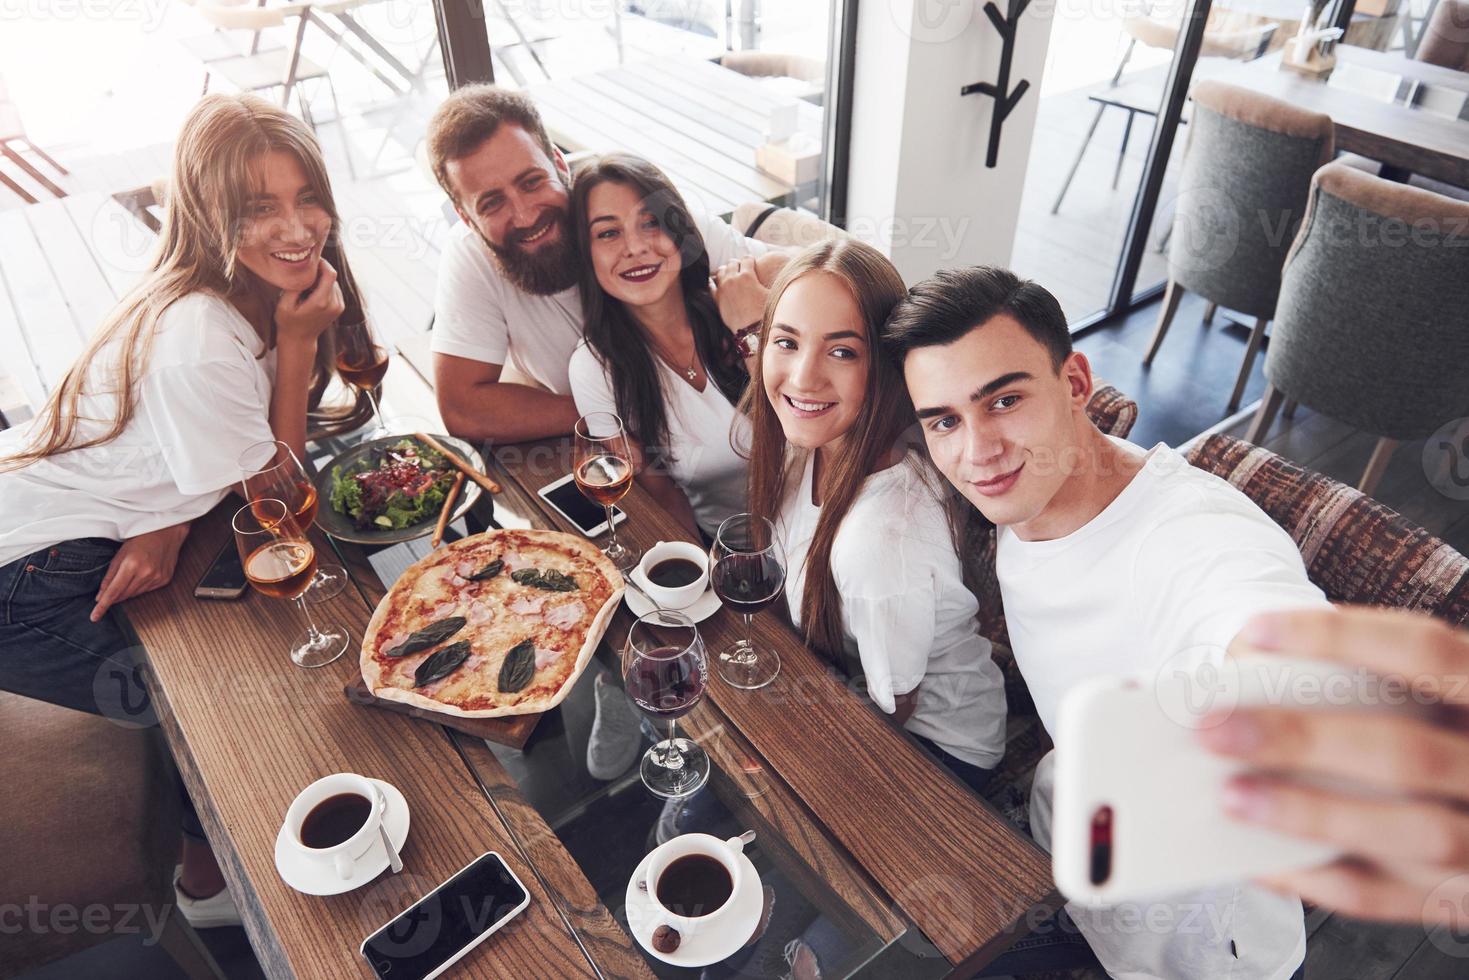 A group of people make a selfie photo in a cafe. The best friends gathered together at a dinner table eating pizza and singing various drinks